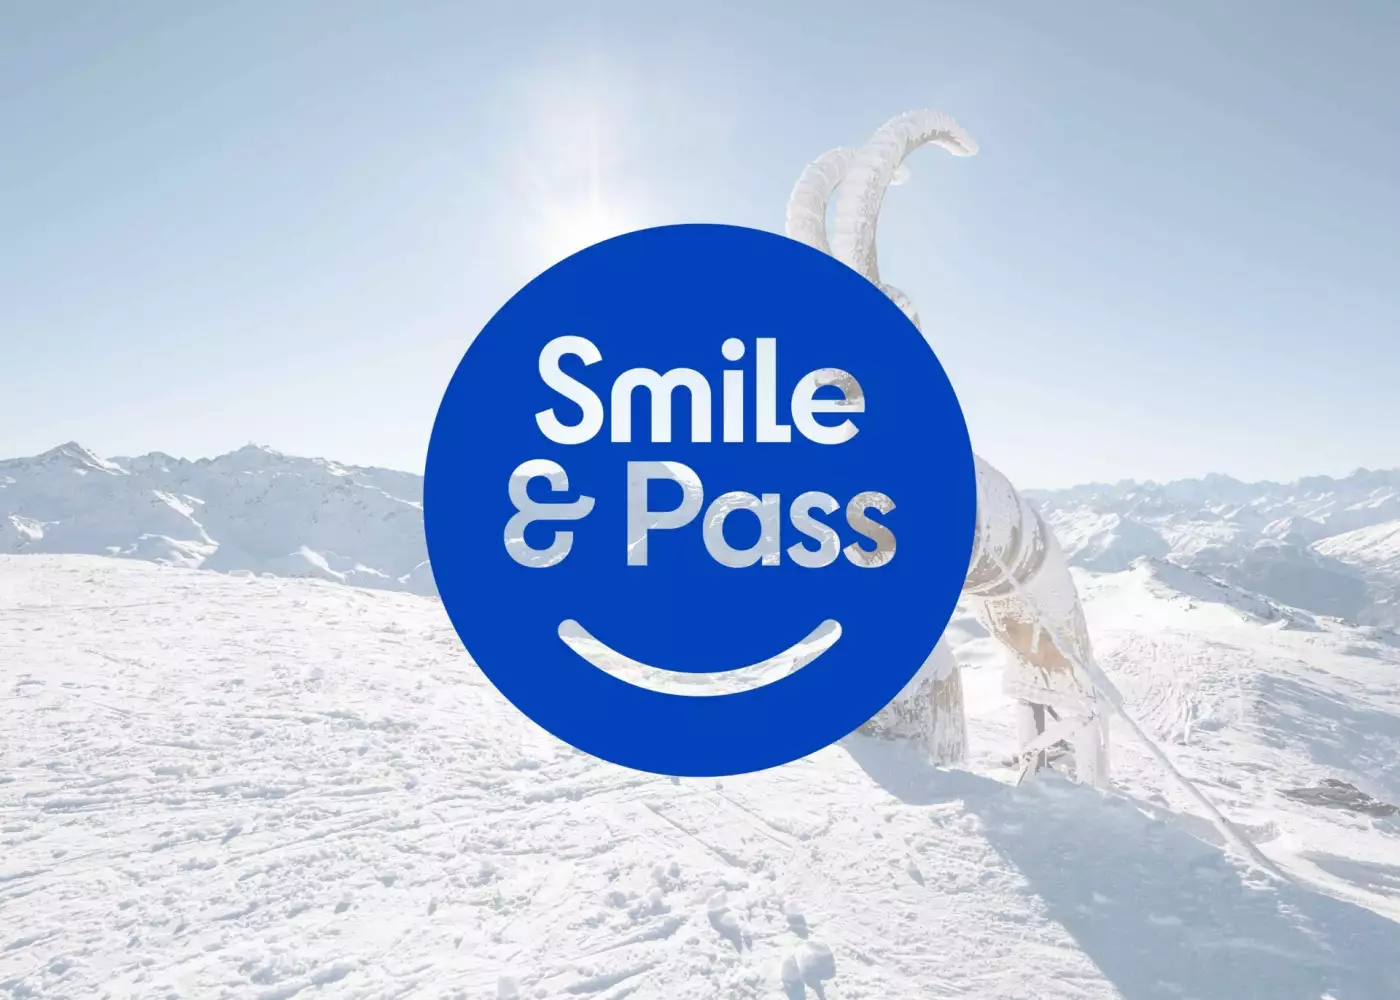 Smile&Pass by Mountain Collection Les Menuires